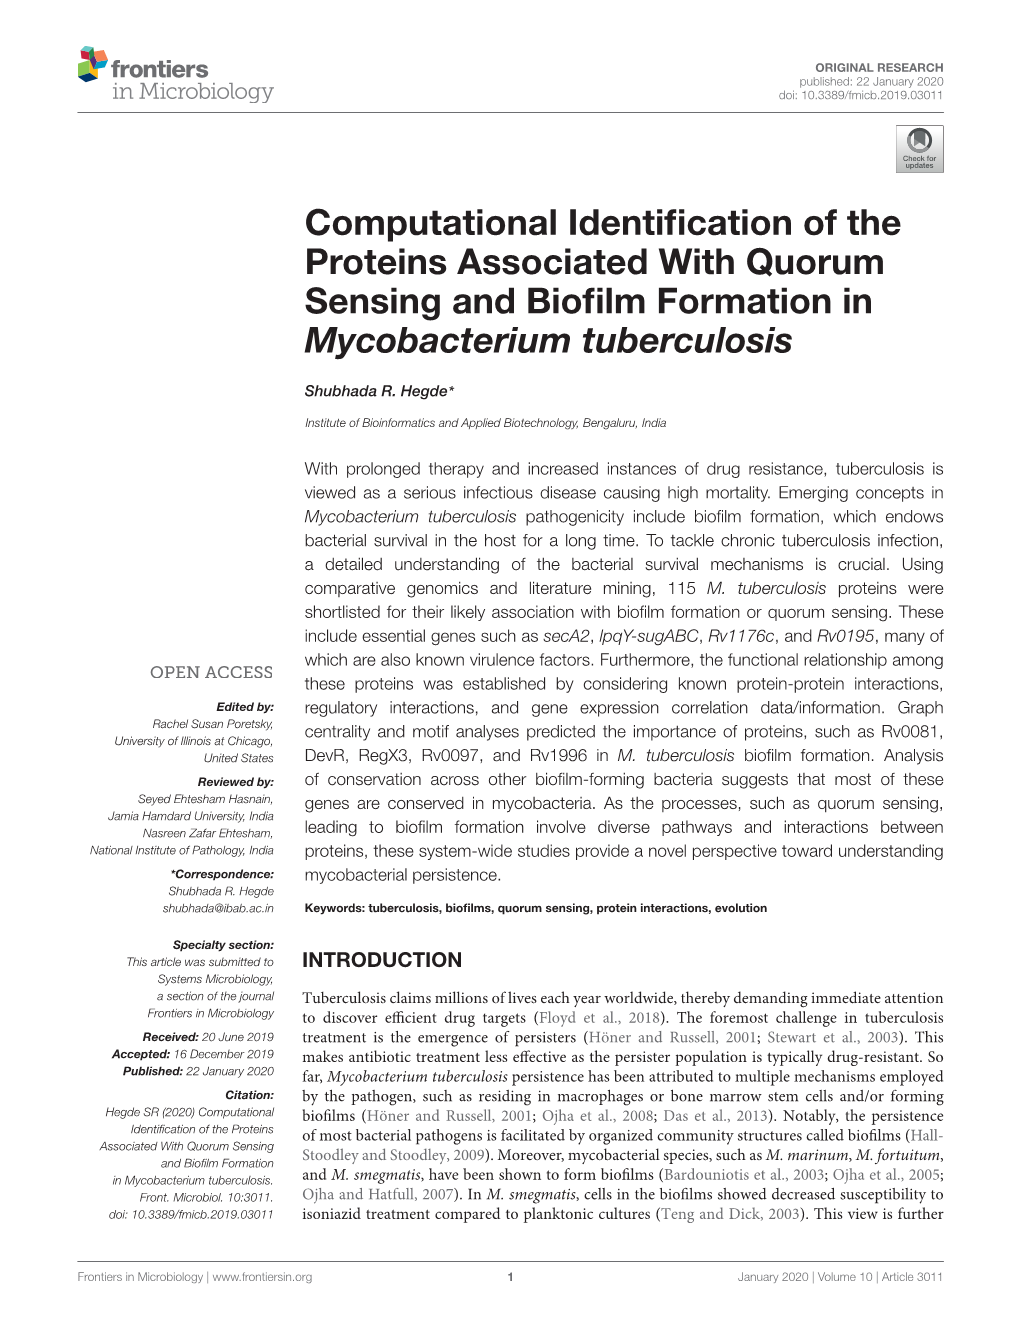 Computational Identification of the Proteins Associated with Quorum